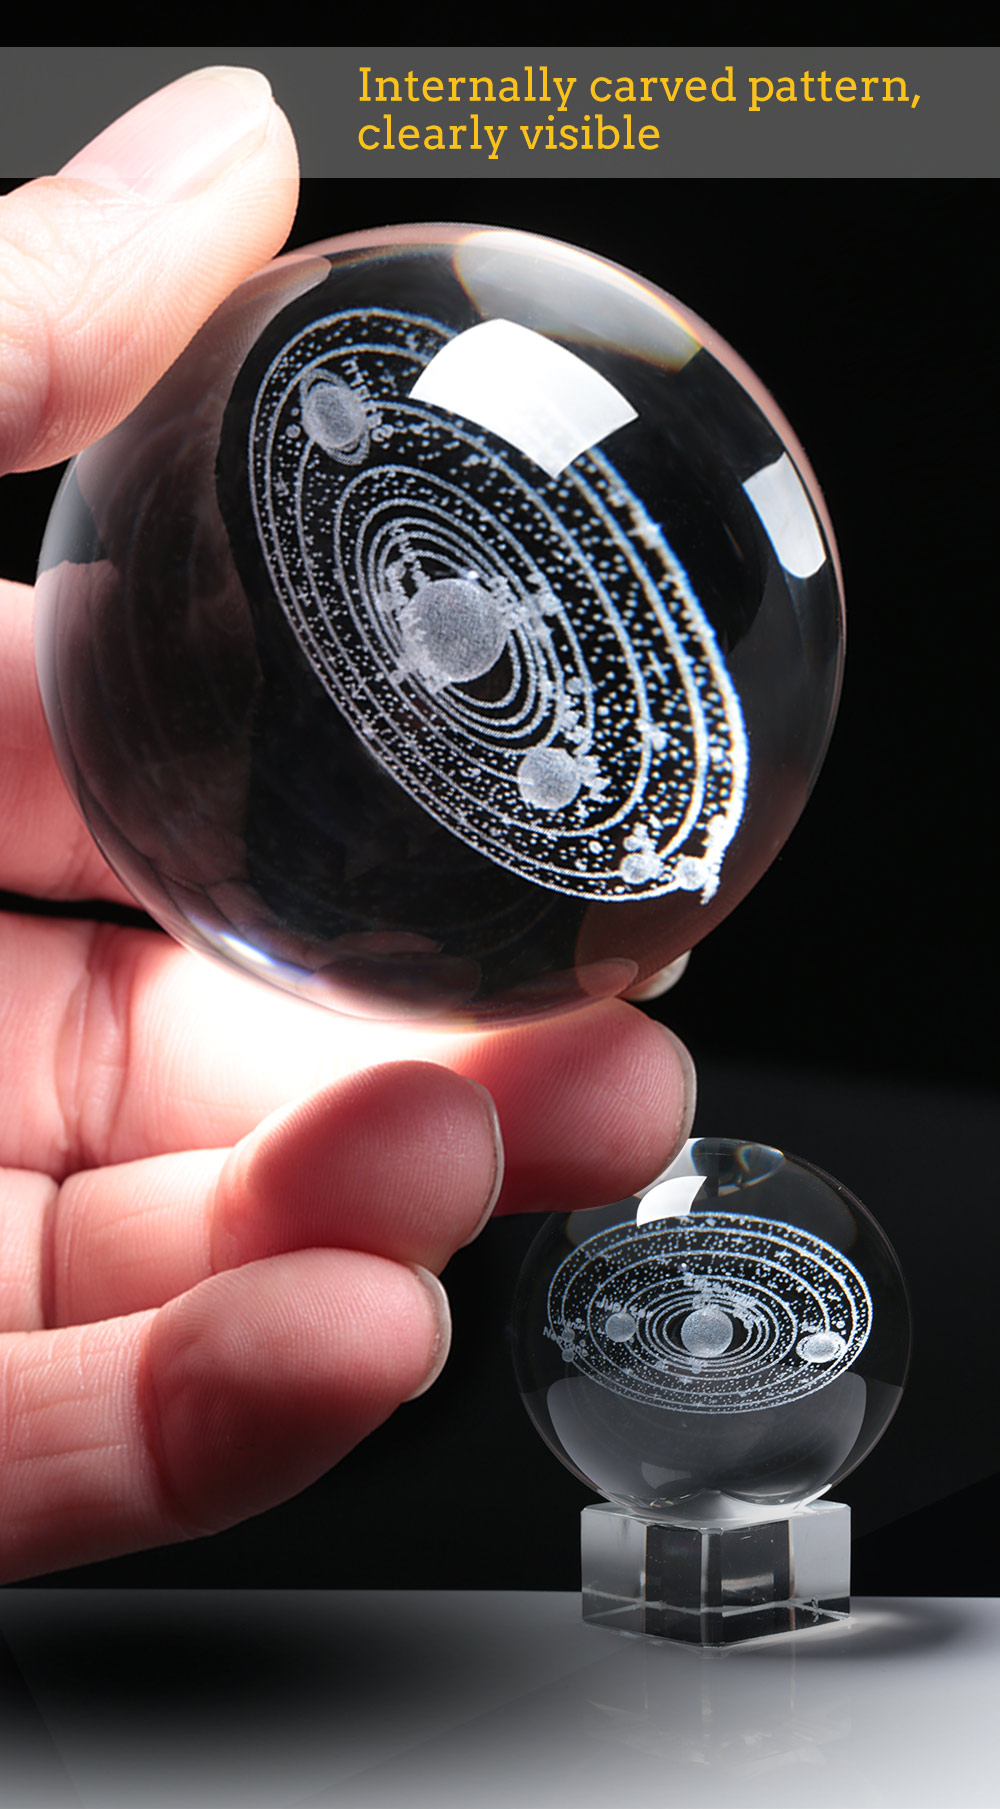 Laser Engraved Solar System Crystal Ball 3D Miniature Planets Model